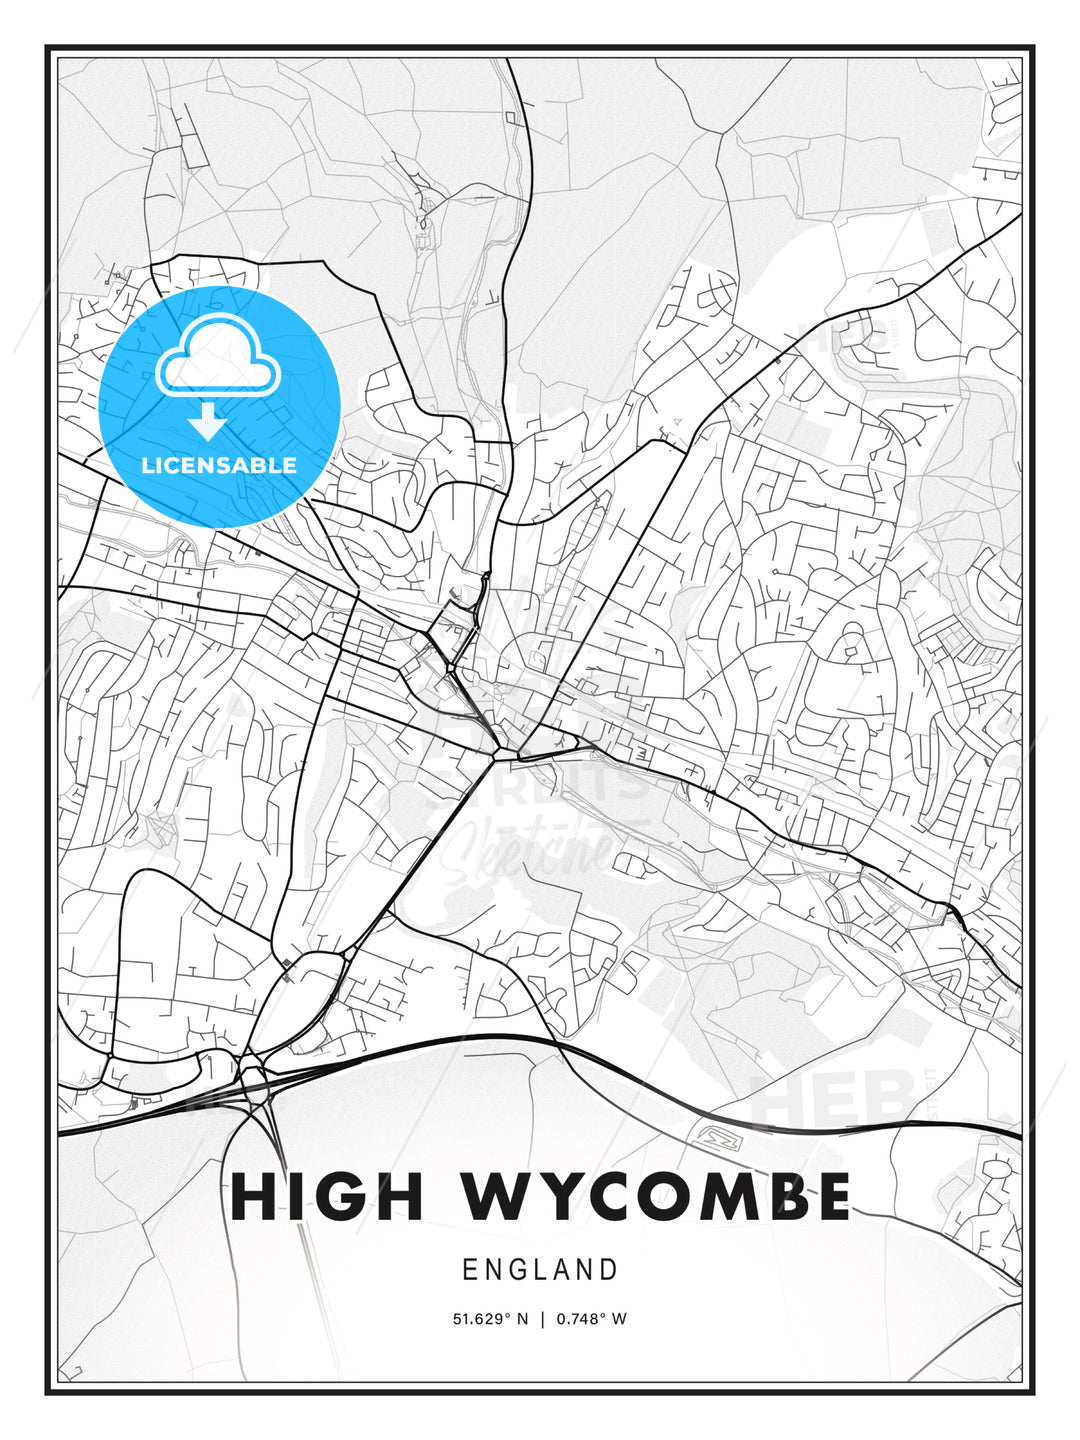 High Wycombe, England, Modern Print Template in Various Formats - HEBSTREITS Sketches